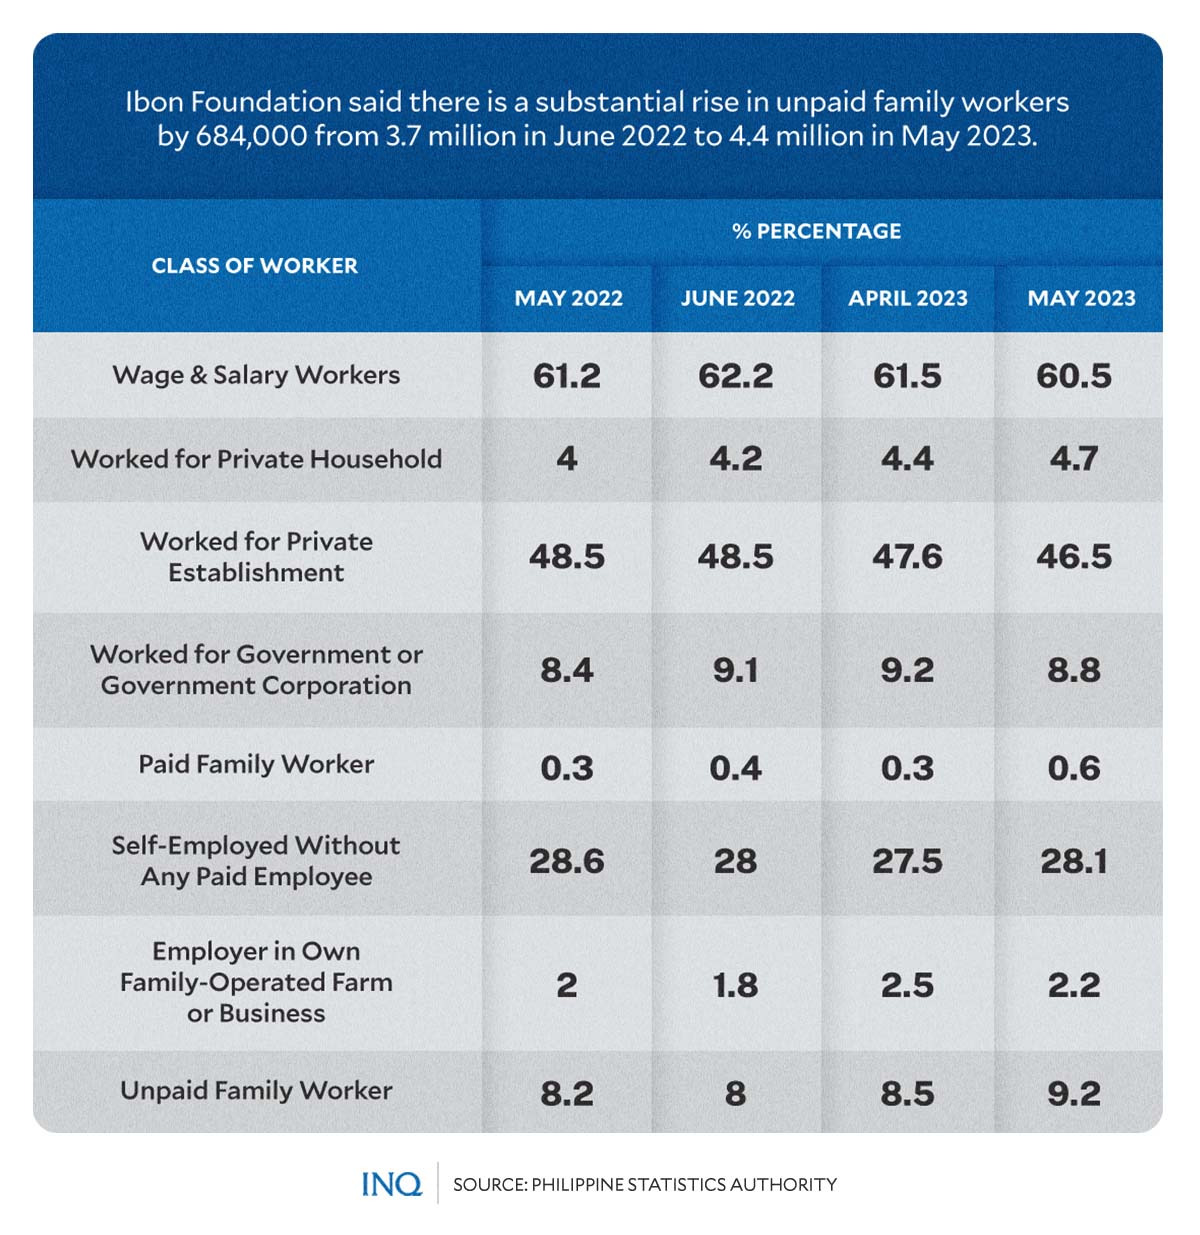 substantial rise in unpaid family workers